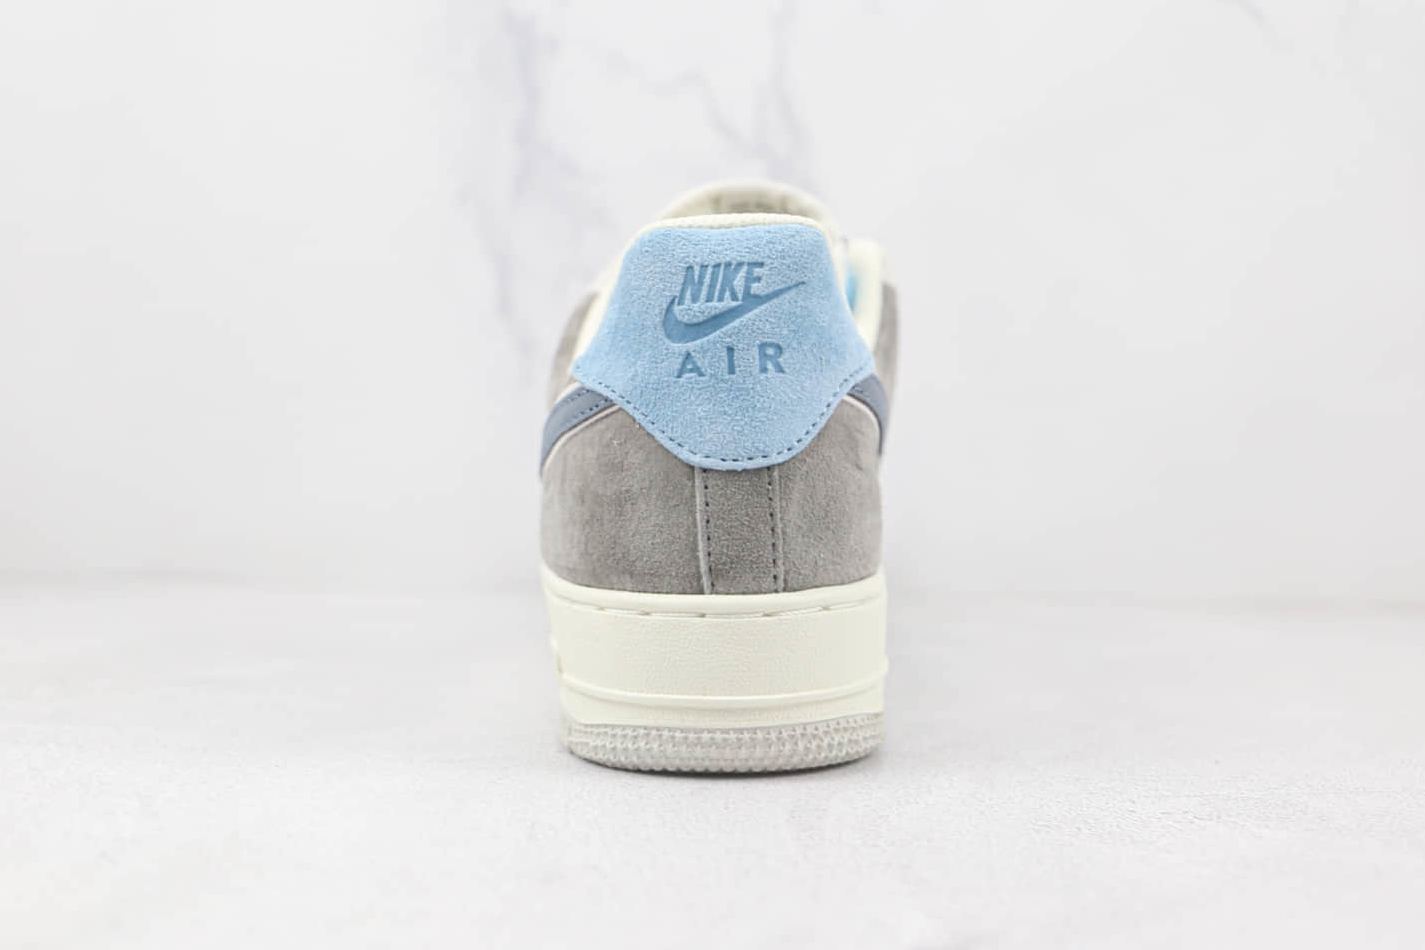 Nike Air Force 1 Low White Grey Navy Blue LZ6699-523 Shoes - Premium Quality and Style